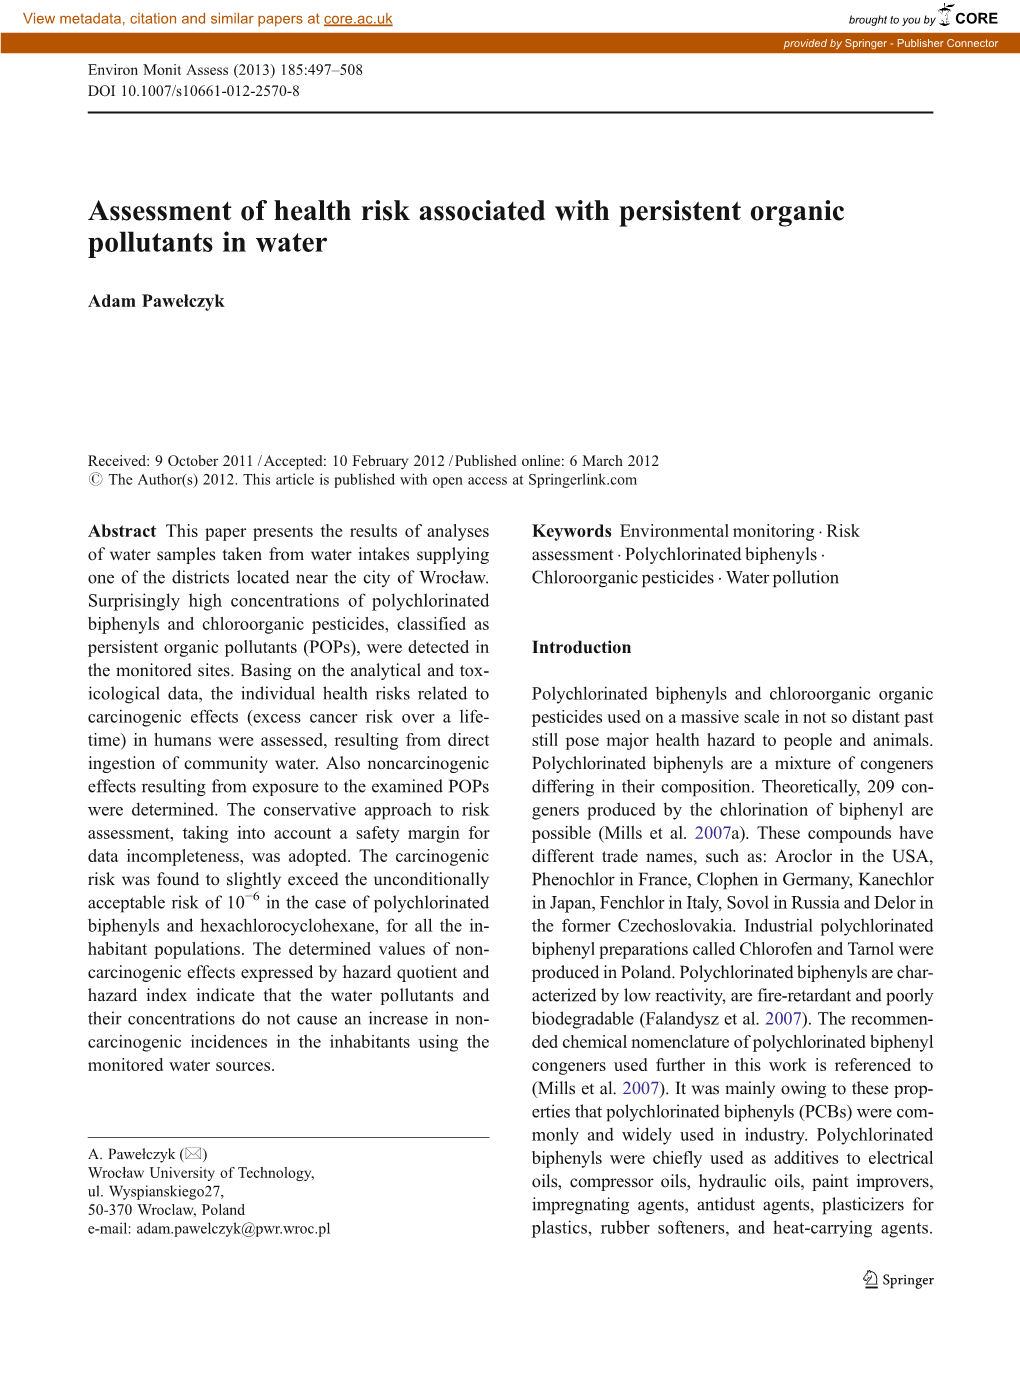 Assessment of Health Risk Associated with Persistent Organic Pollutants in Water